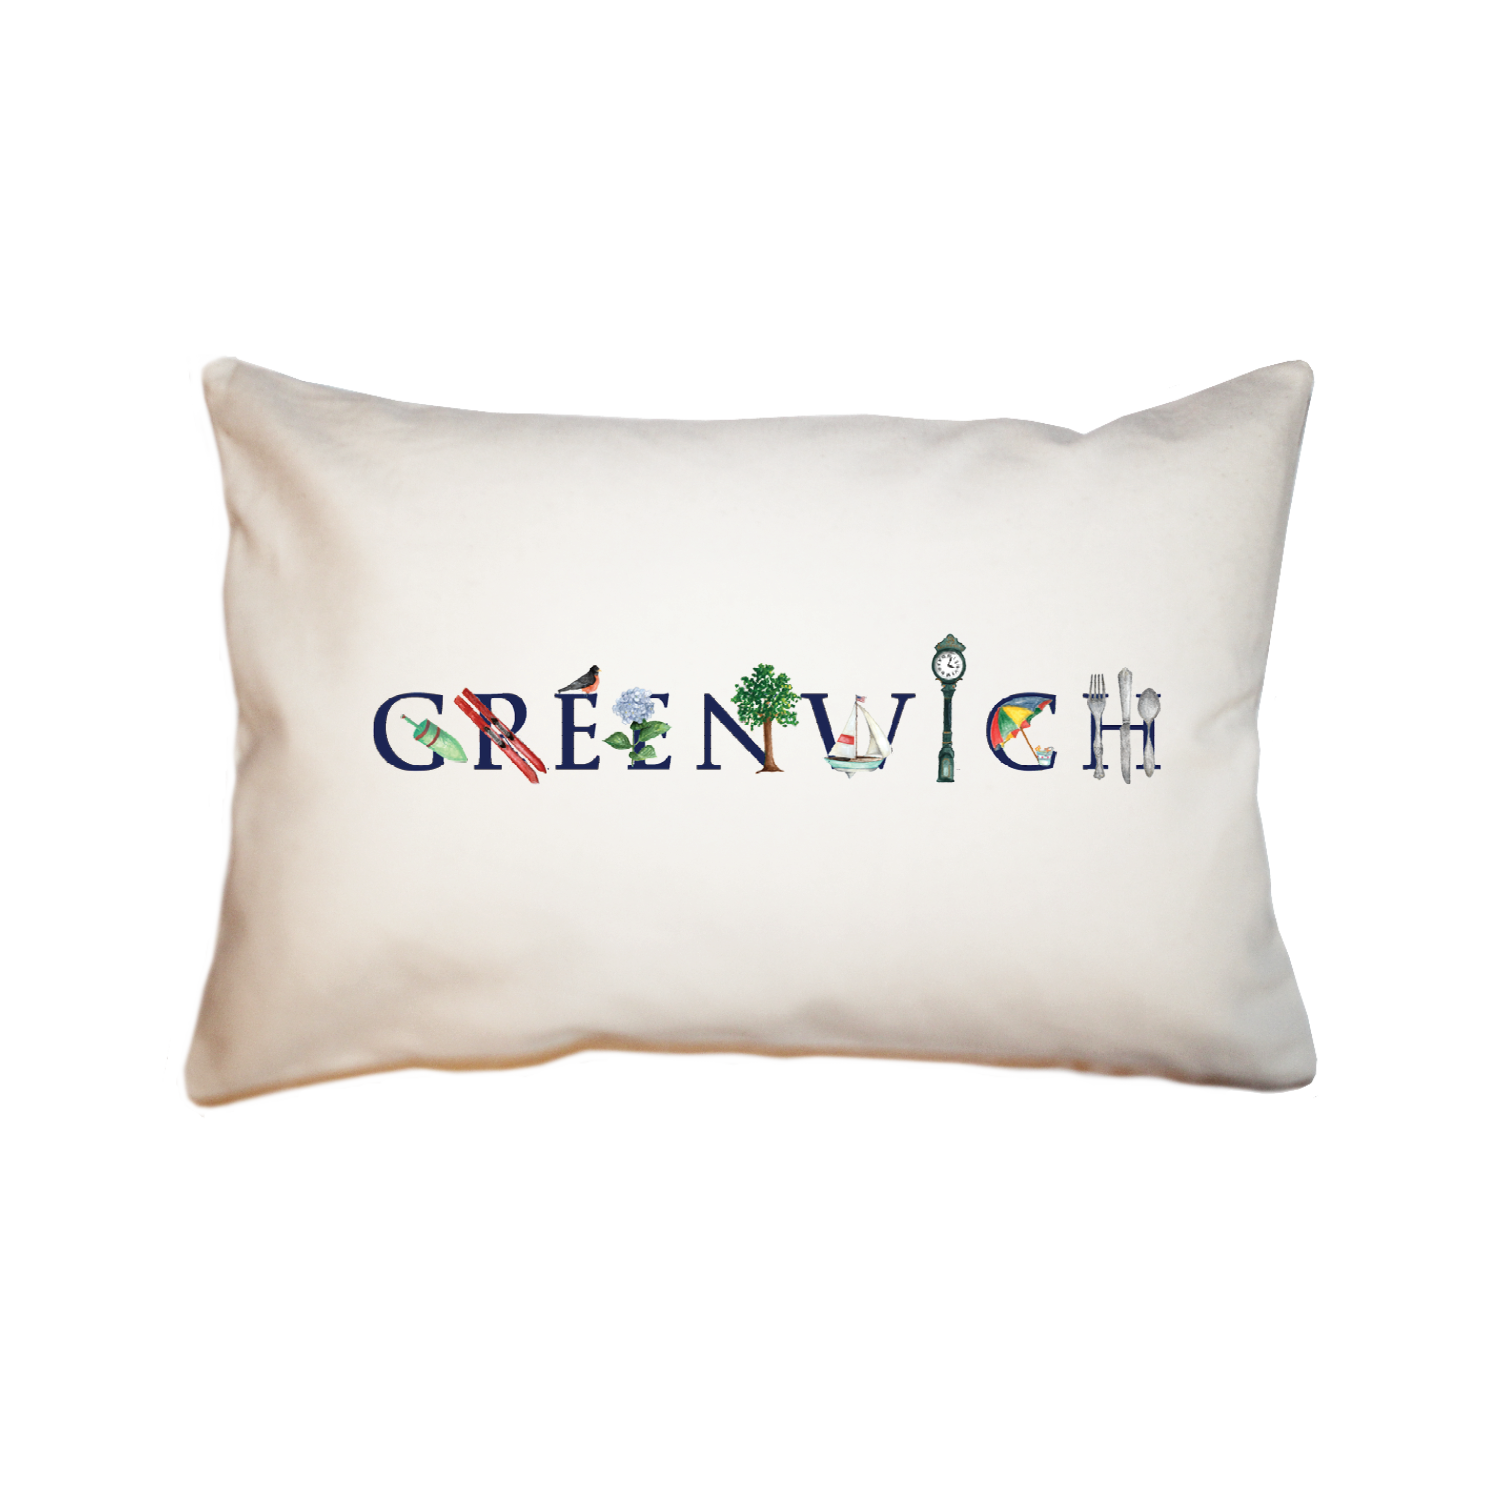 greenwich large rectangle pillow